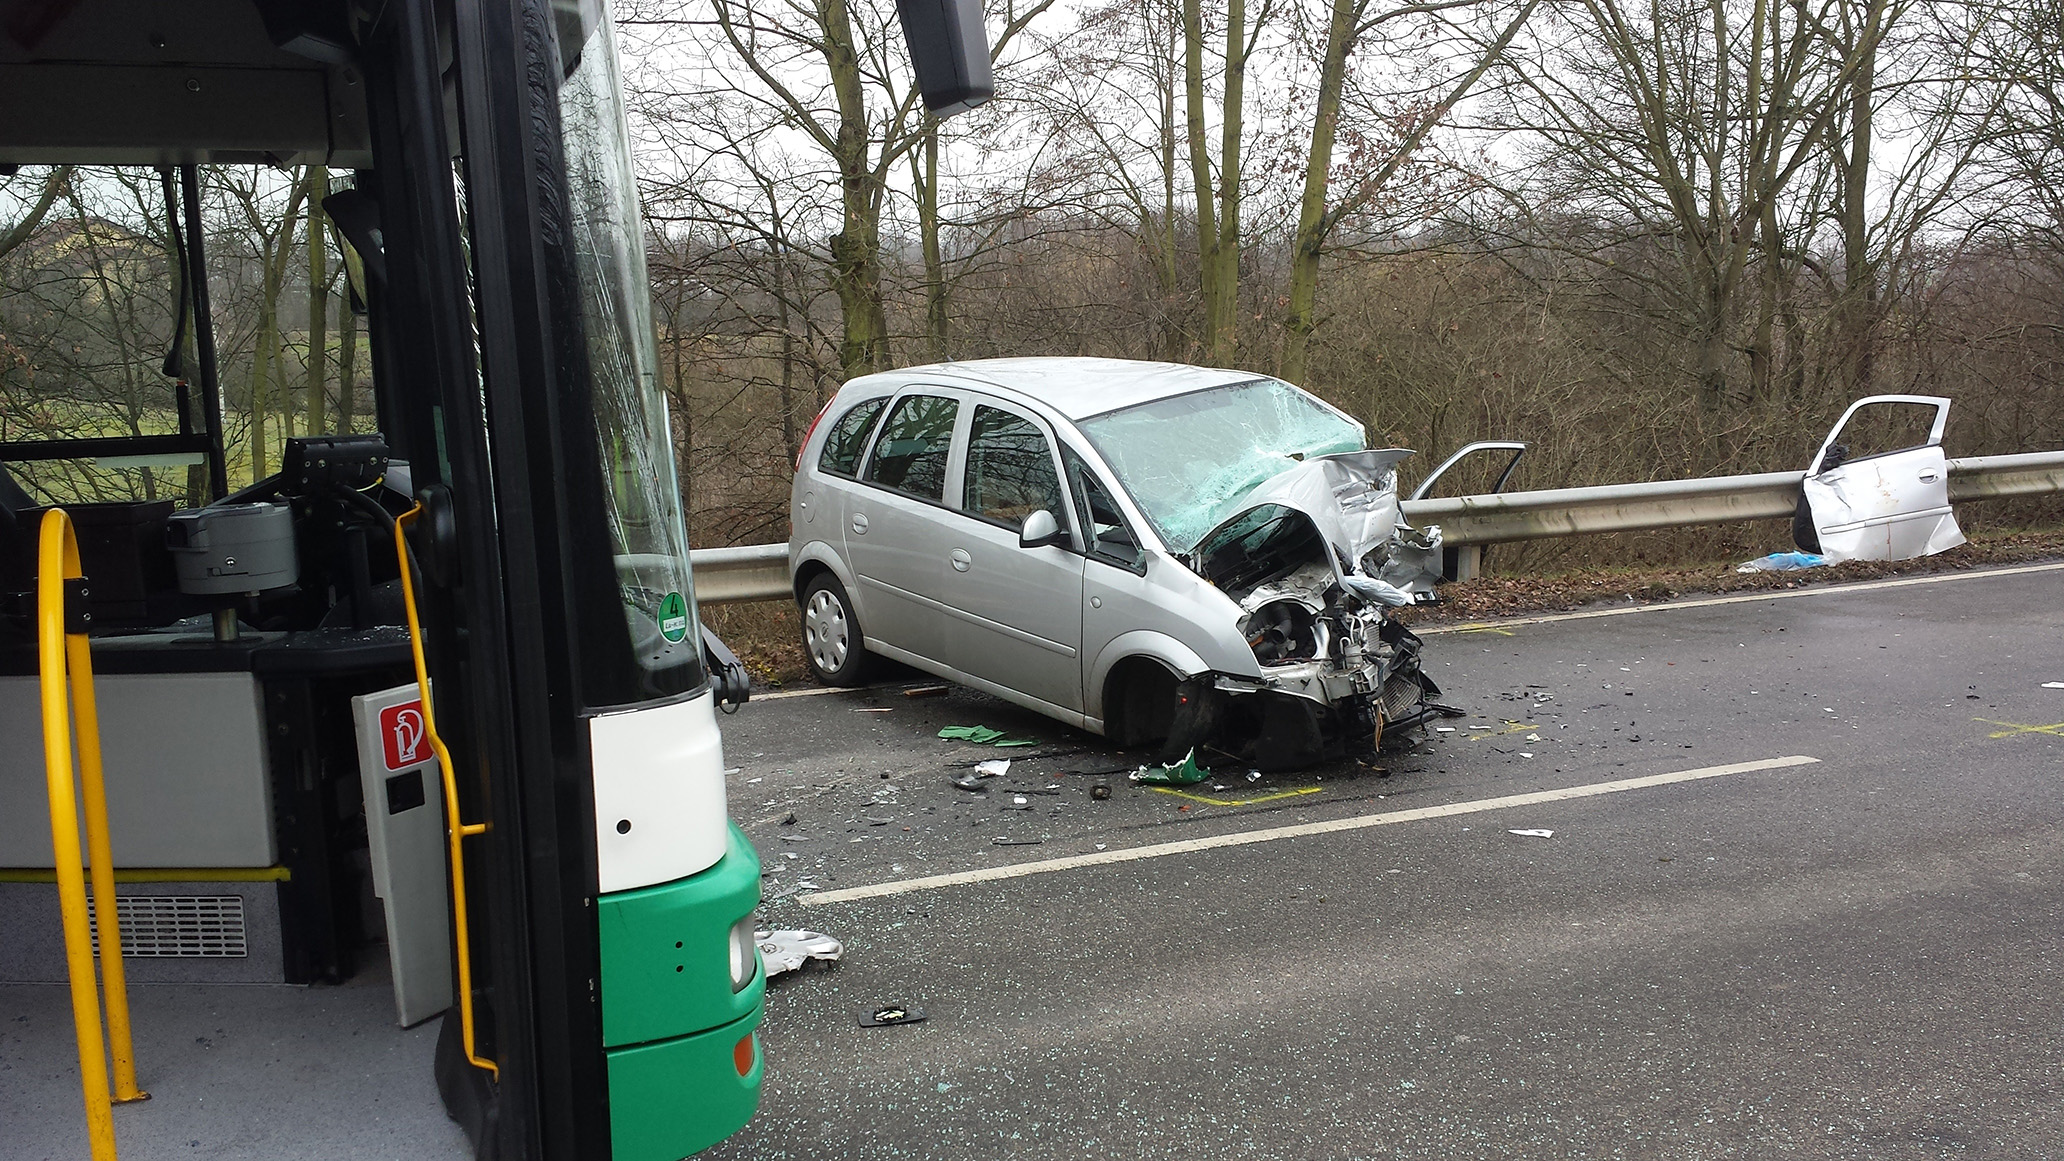 Bus Public Transport Vehicle Collision, Road Traffic Accident, Whiplash, Injury Compensation Manchester